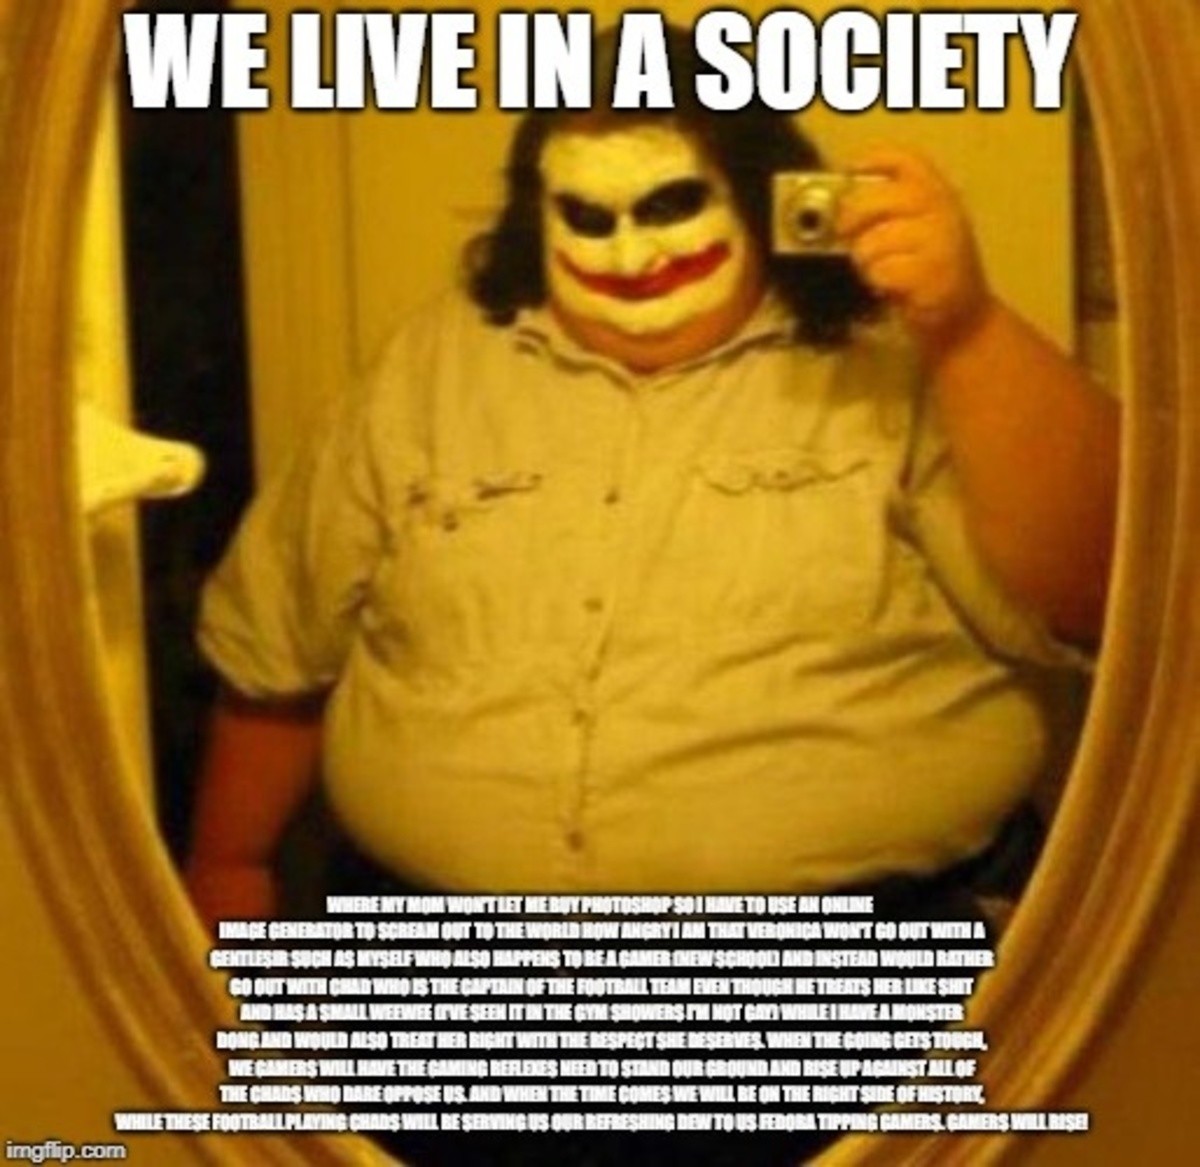 Living in a society